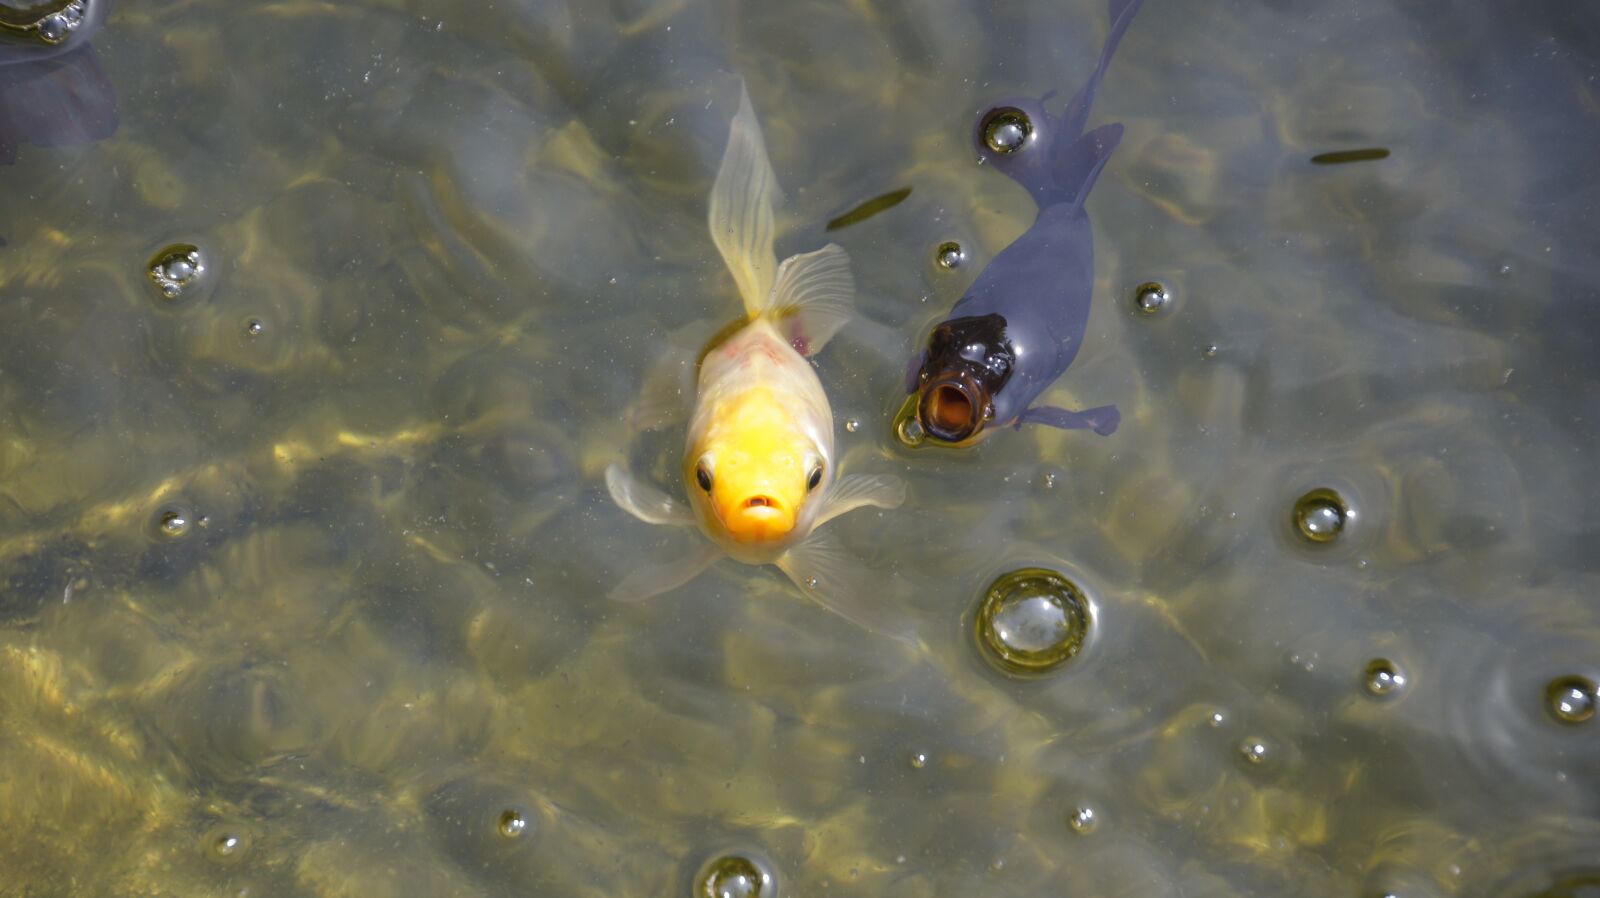 DT 18-270mm F3.5-6.3 sample photo. Fish, pond, water photography